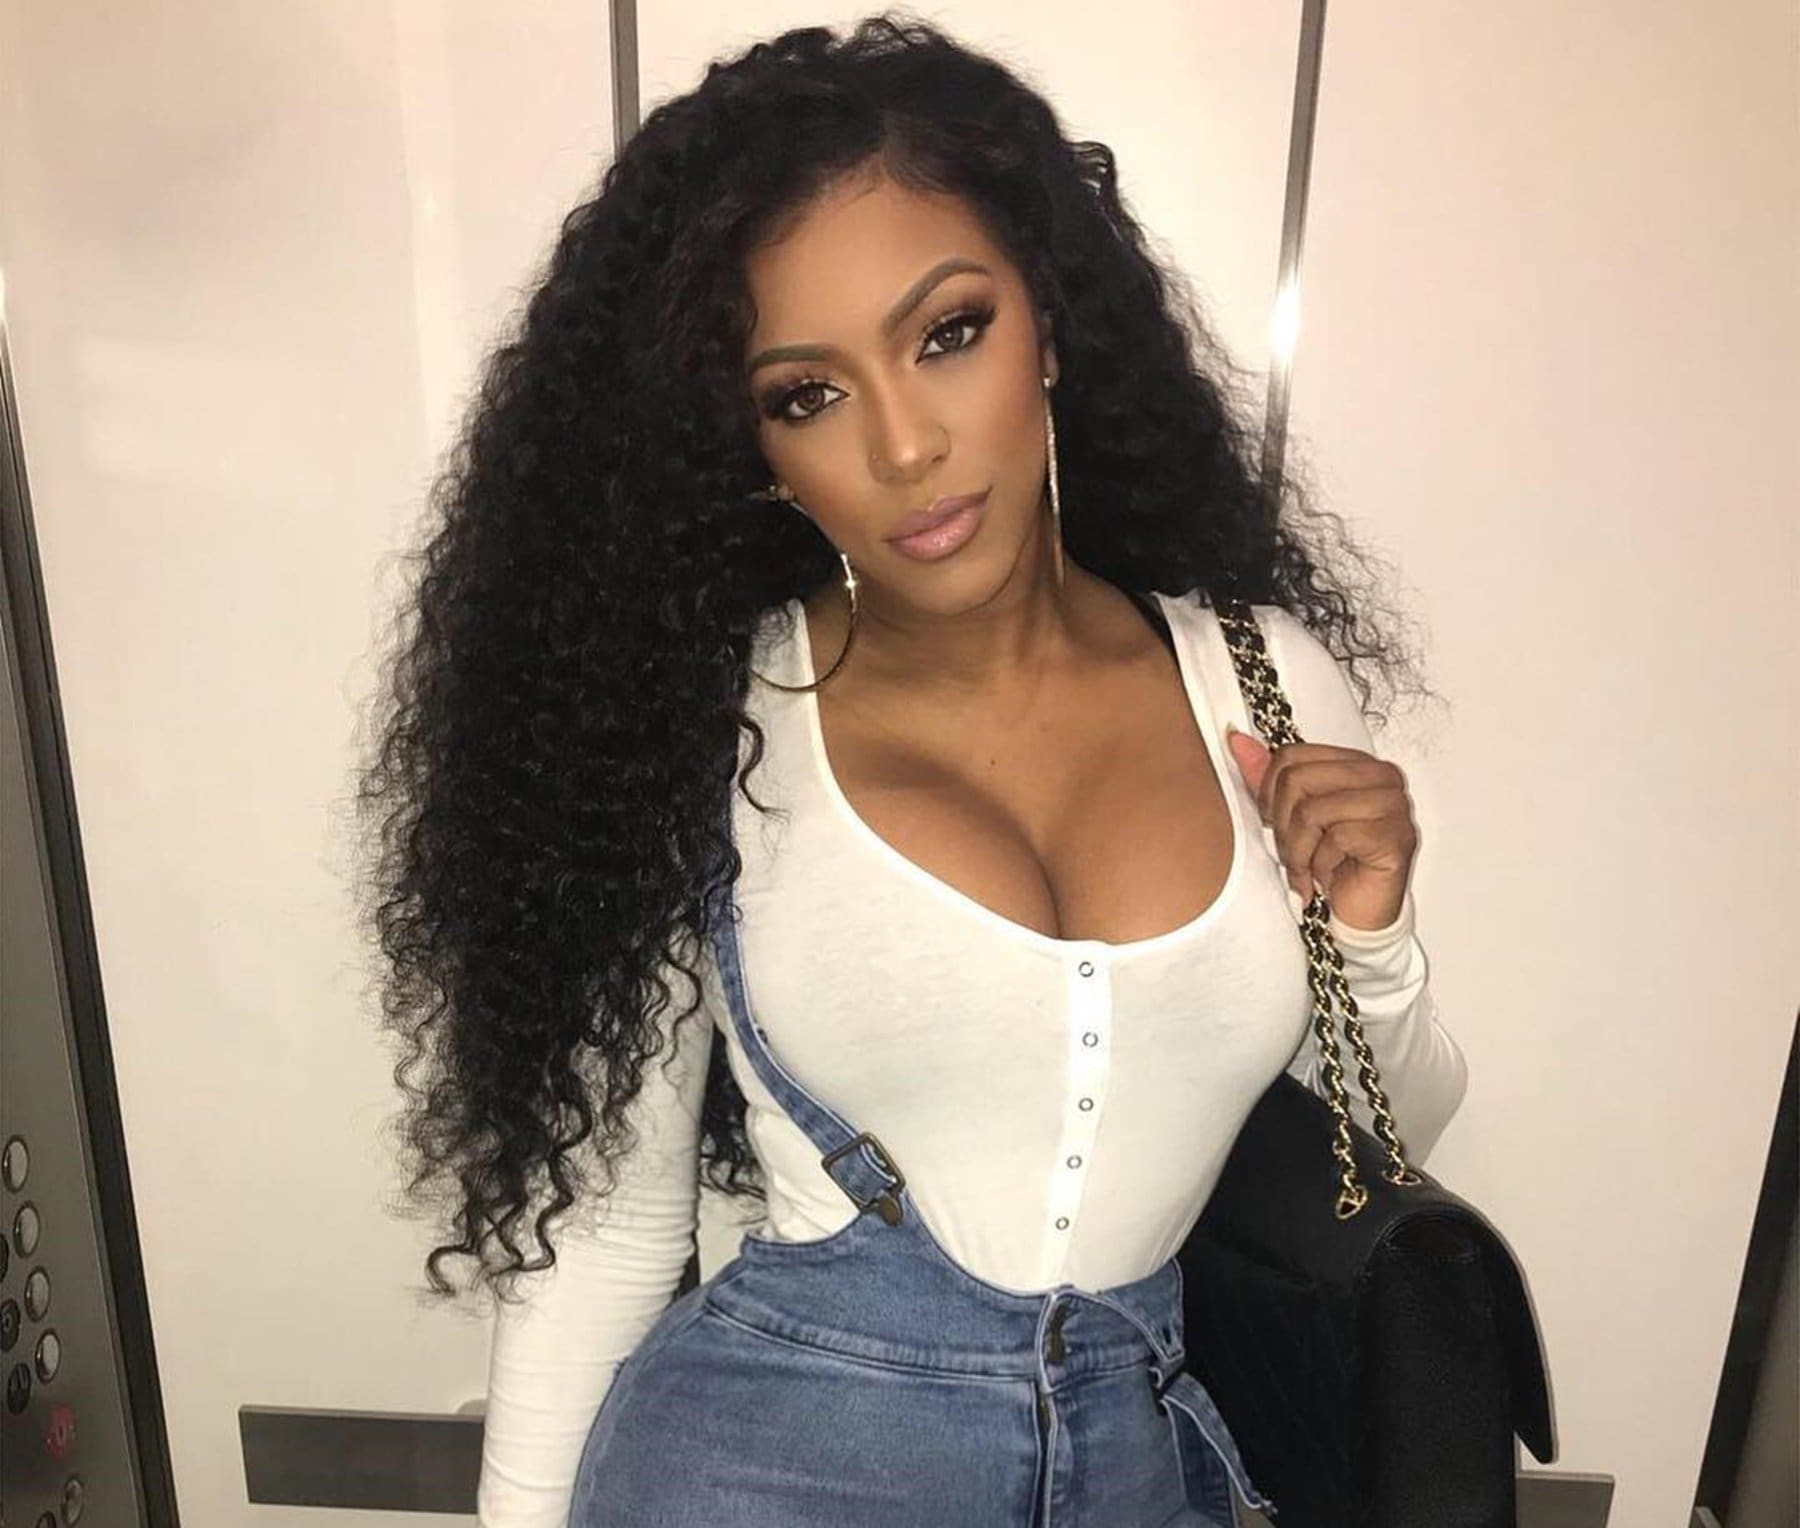 Porsha Williams Shares Pics Of Her Baby Girl PJ FaceTiming With Her - See Them Here